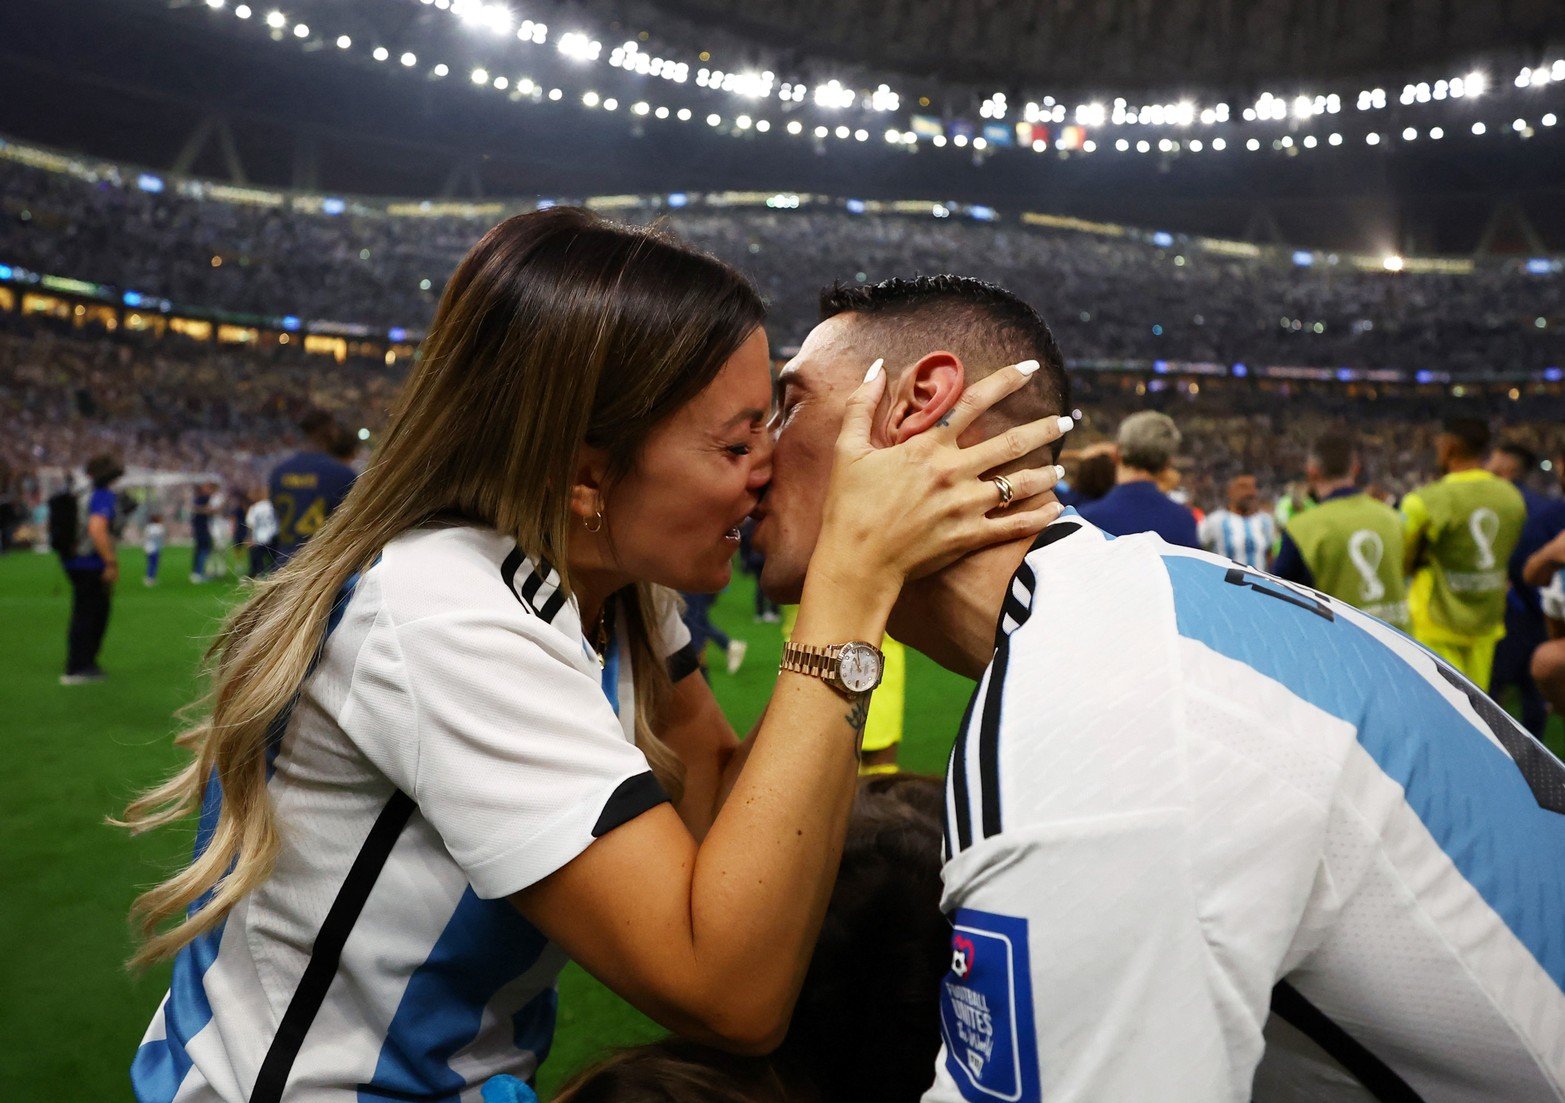 Soccer Football - FIFA World Cup Qatar 2022 - Final - Argentina v France - Lusail Stadium, Lusail, Qatar - December 18, 2022
Argentina's Angel Di Maria with his wife Jorgelina Cardoso after the trophy ceremony REUTERS/Lee Smith